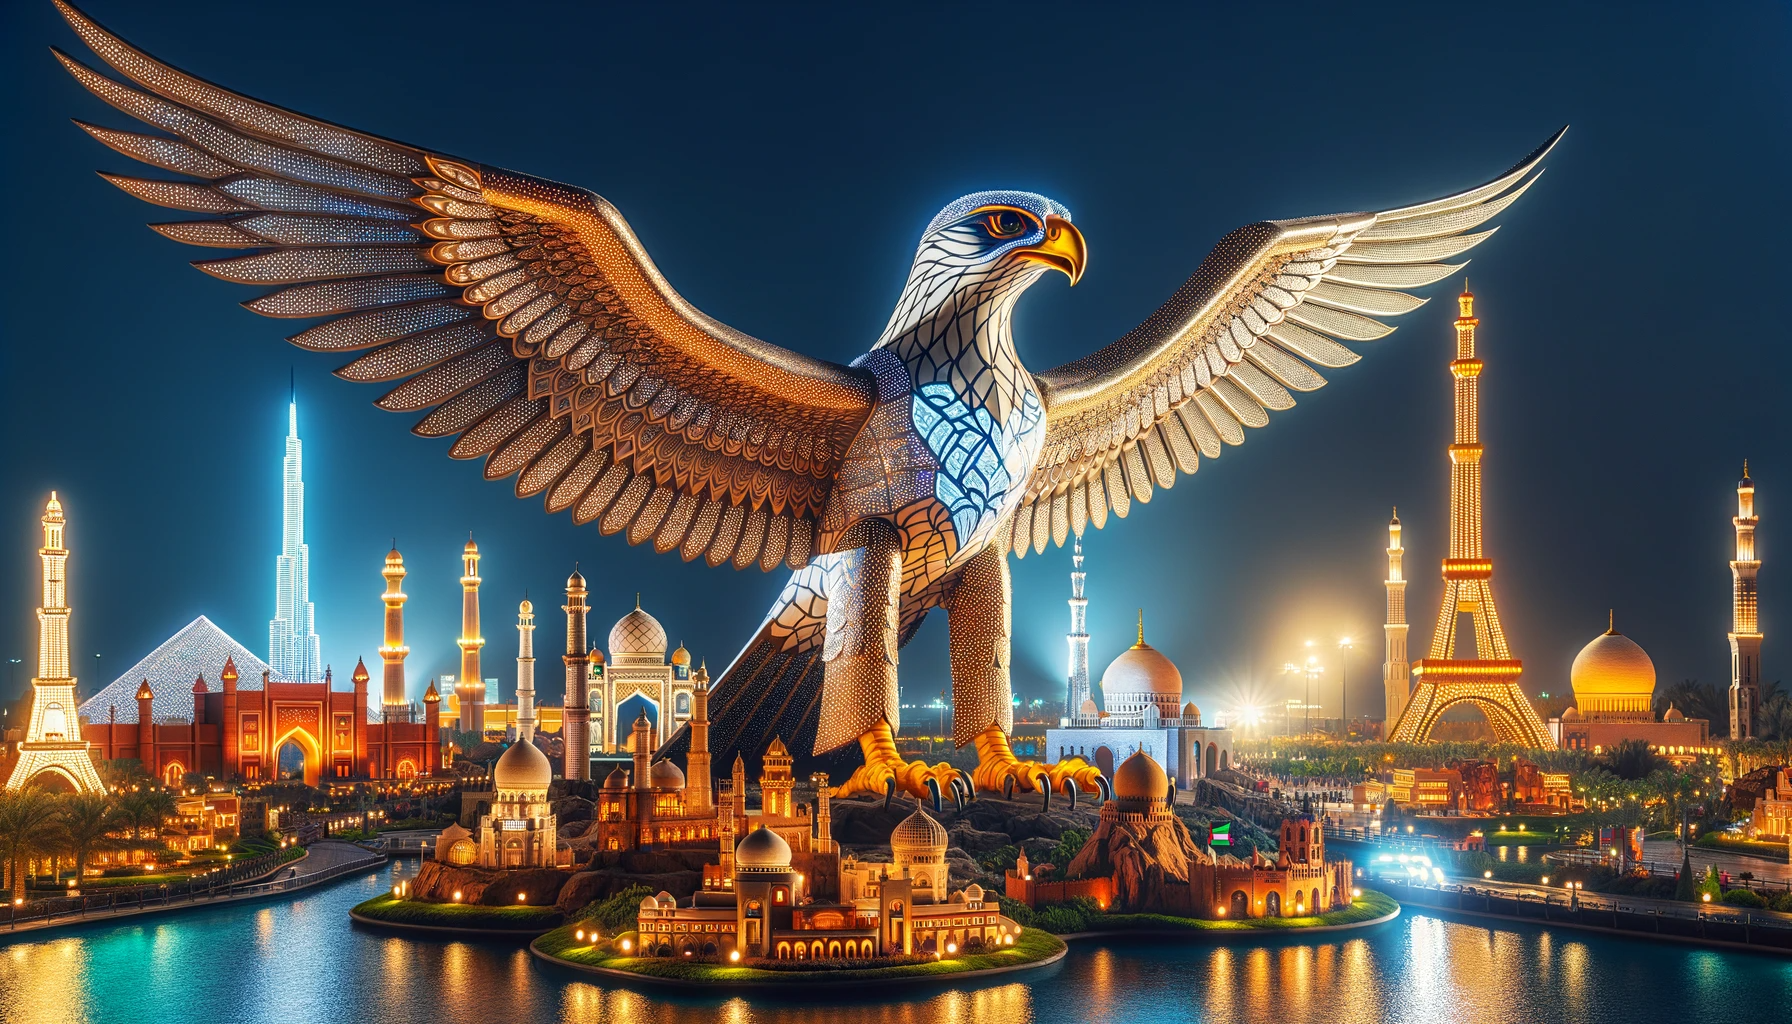 DALL·E 2024 01 05 17.30.24 A stunning image of the worlds largest illuminated steel falcon sculpture at Dubais Global Village. The sculpture with a wingspan of over 22 meters